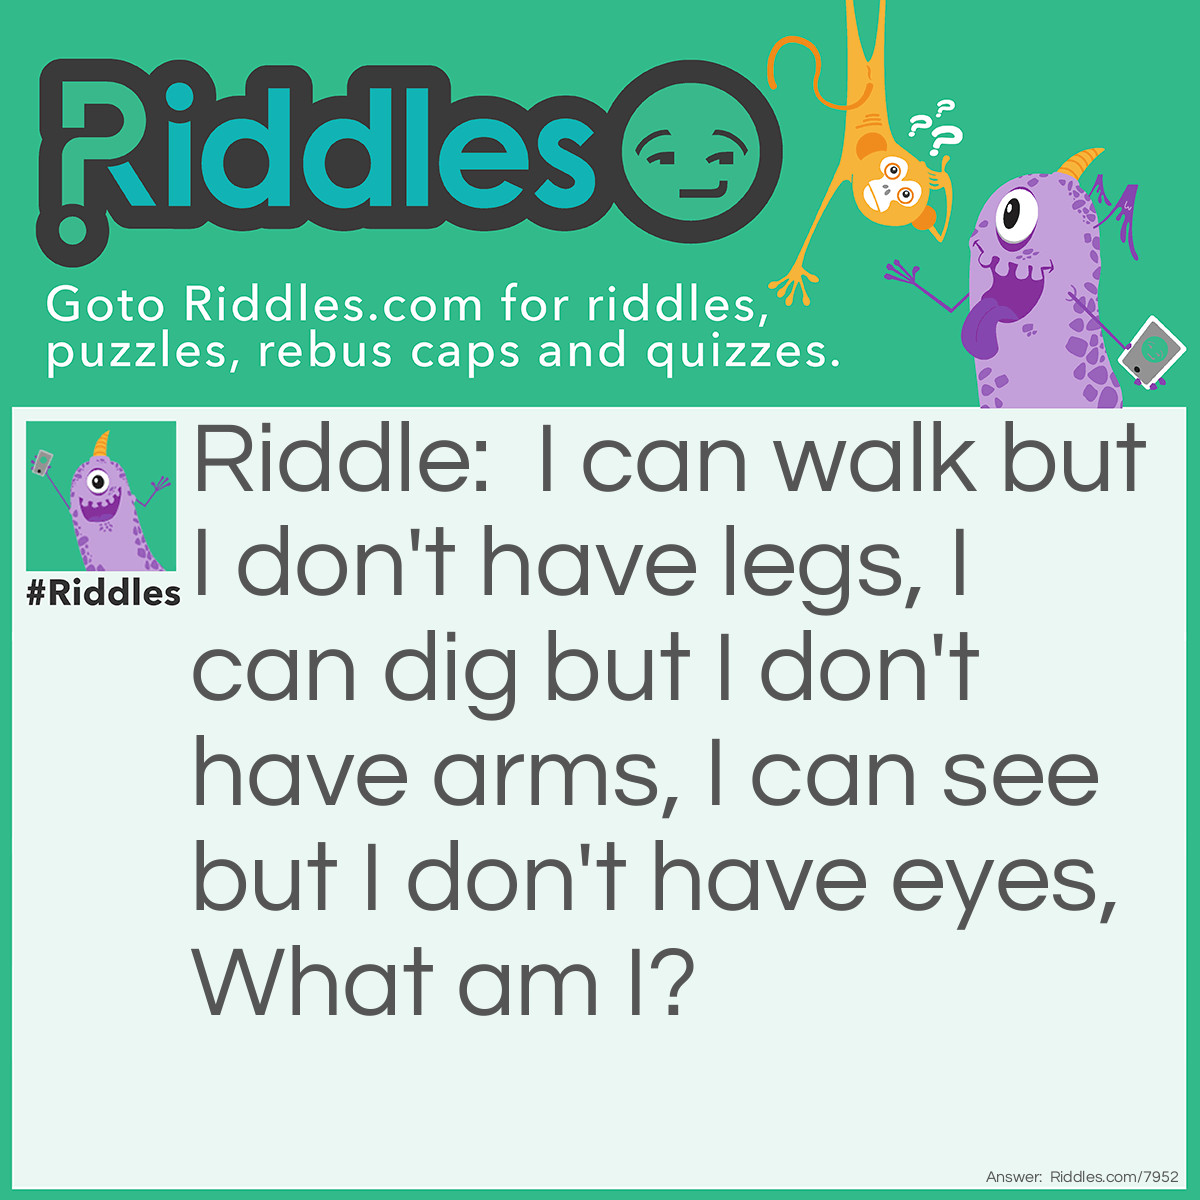 Riddle: I can walk but I don't have legs, I can dig but I don't have arms, I can see but I don't have eyes, What am I? Answer: A worm.